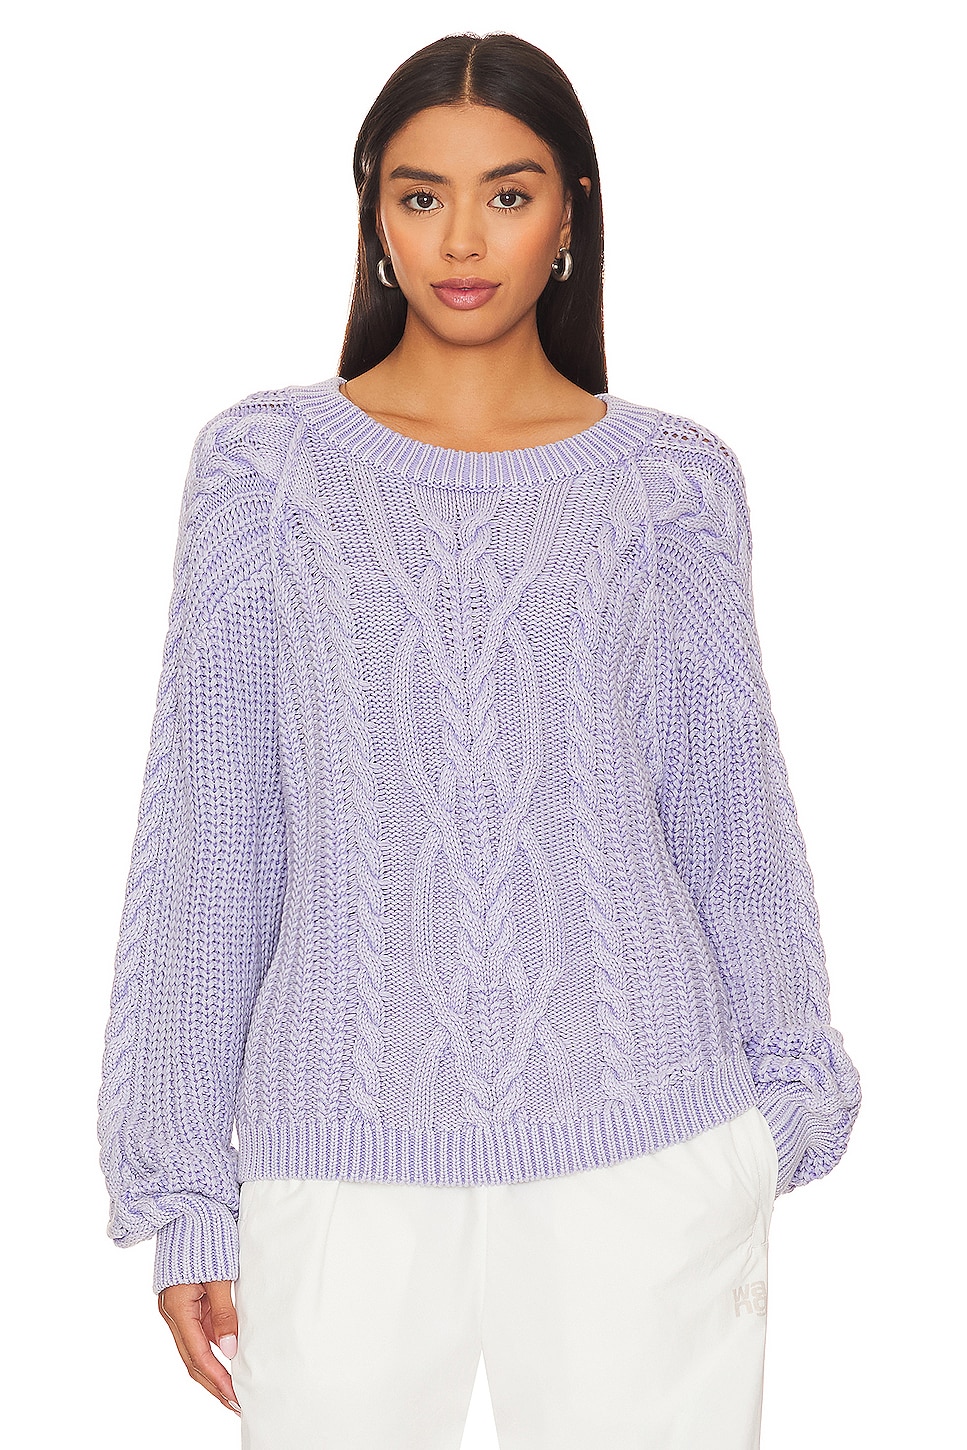 Free People Frankie Cable Sweater in Heavenly Lavender | REVOLVE